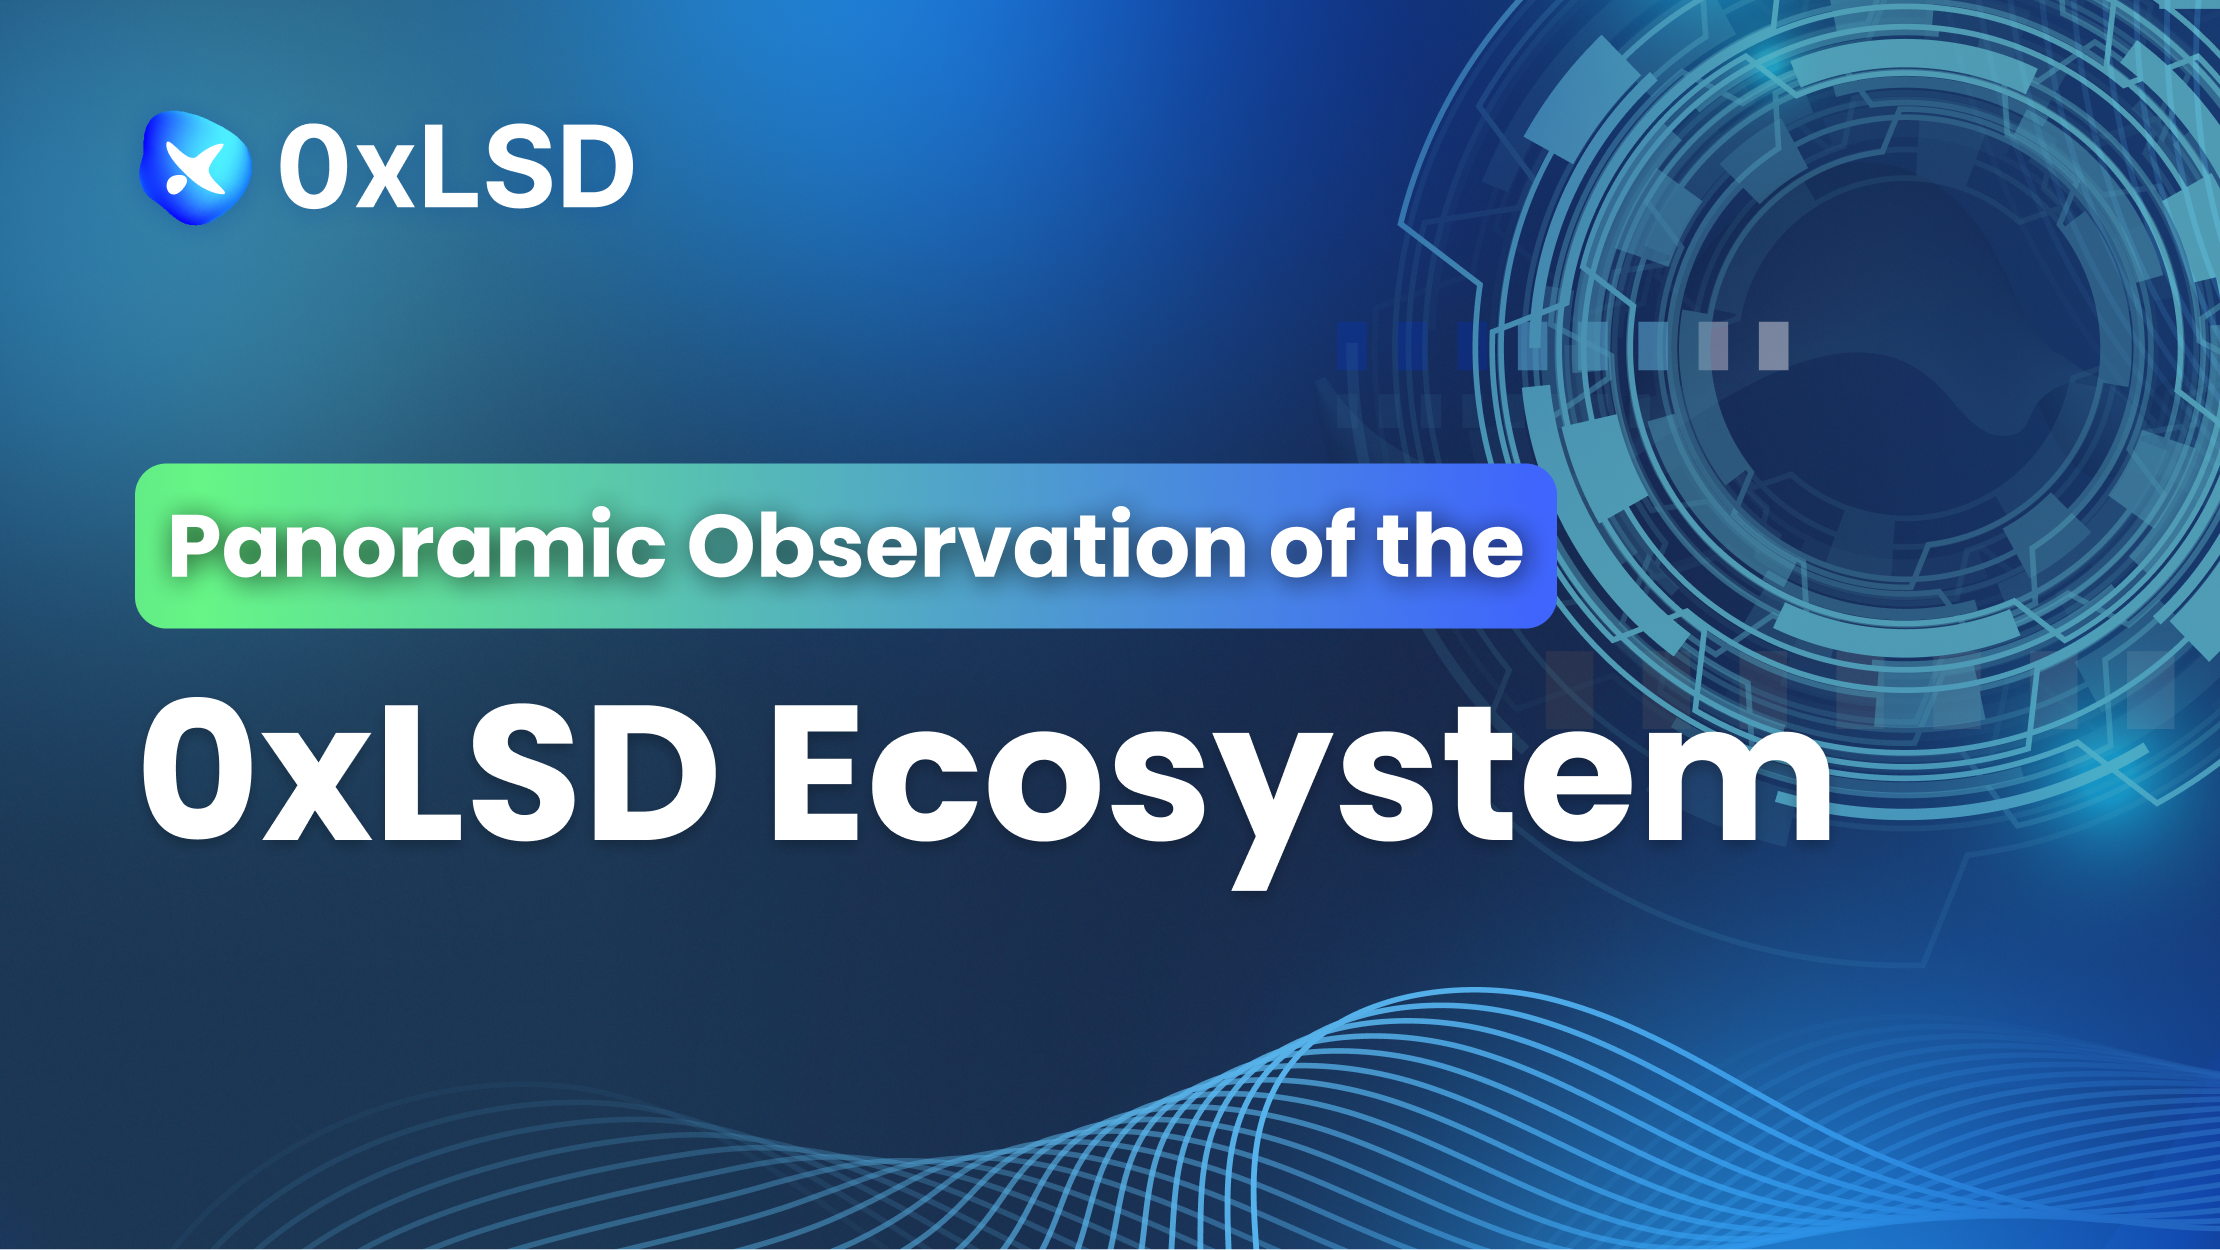 Panoramic Observation of the 0xLSD Ecosystem